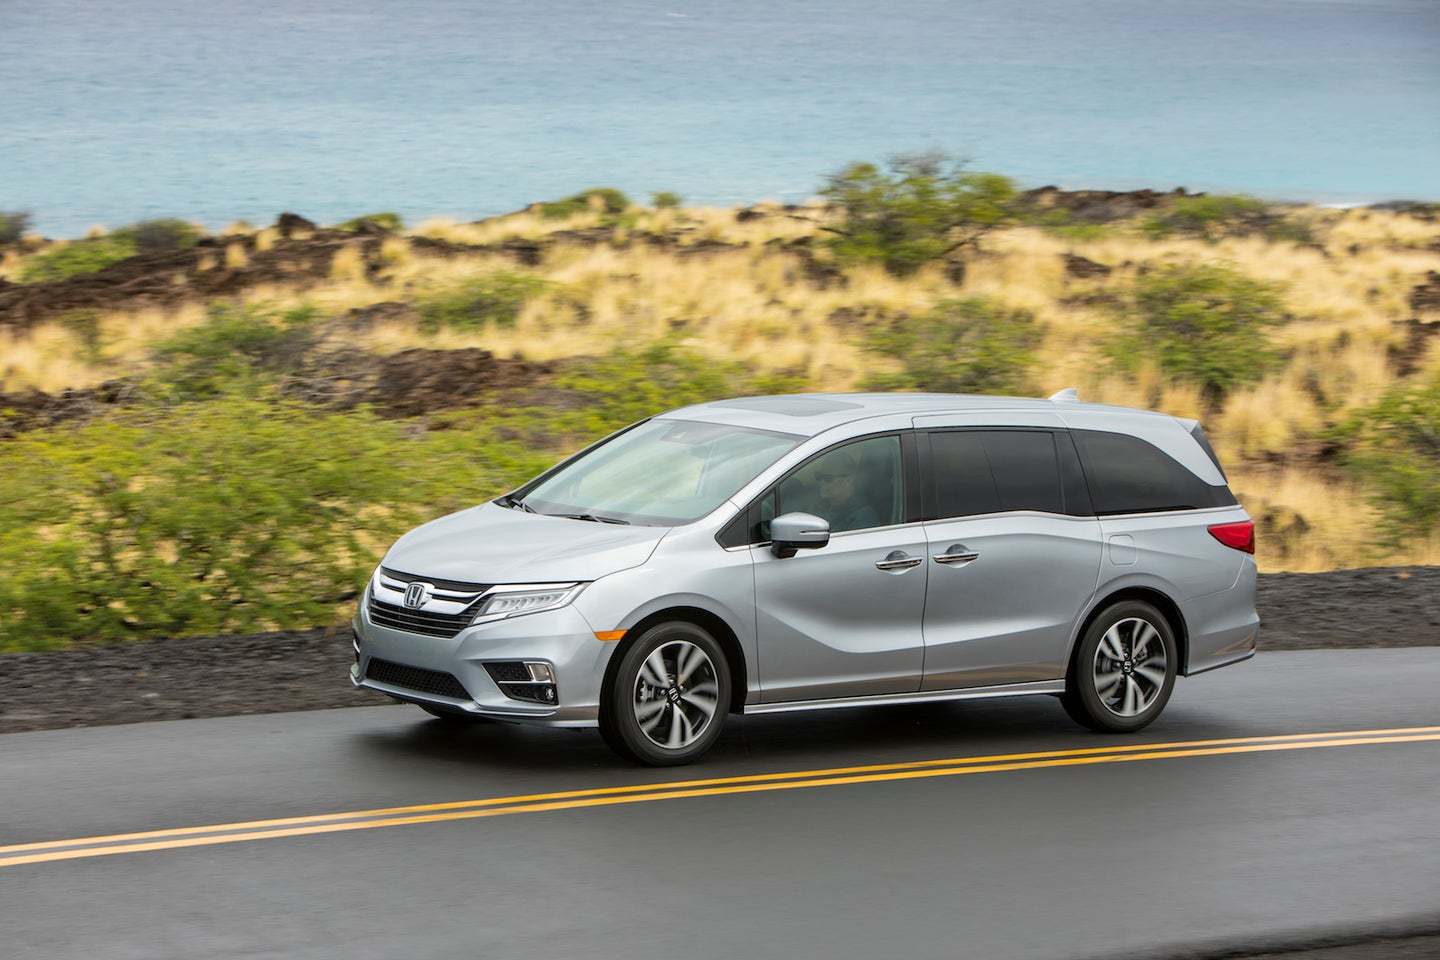 2018 Honda Odyssey Is All About a Happy Family